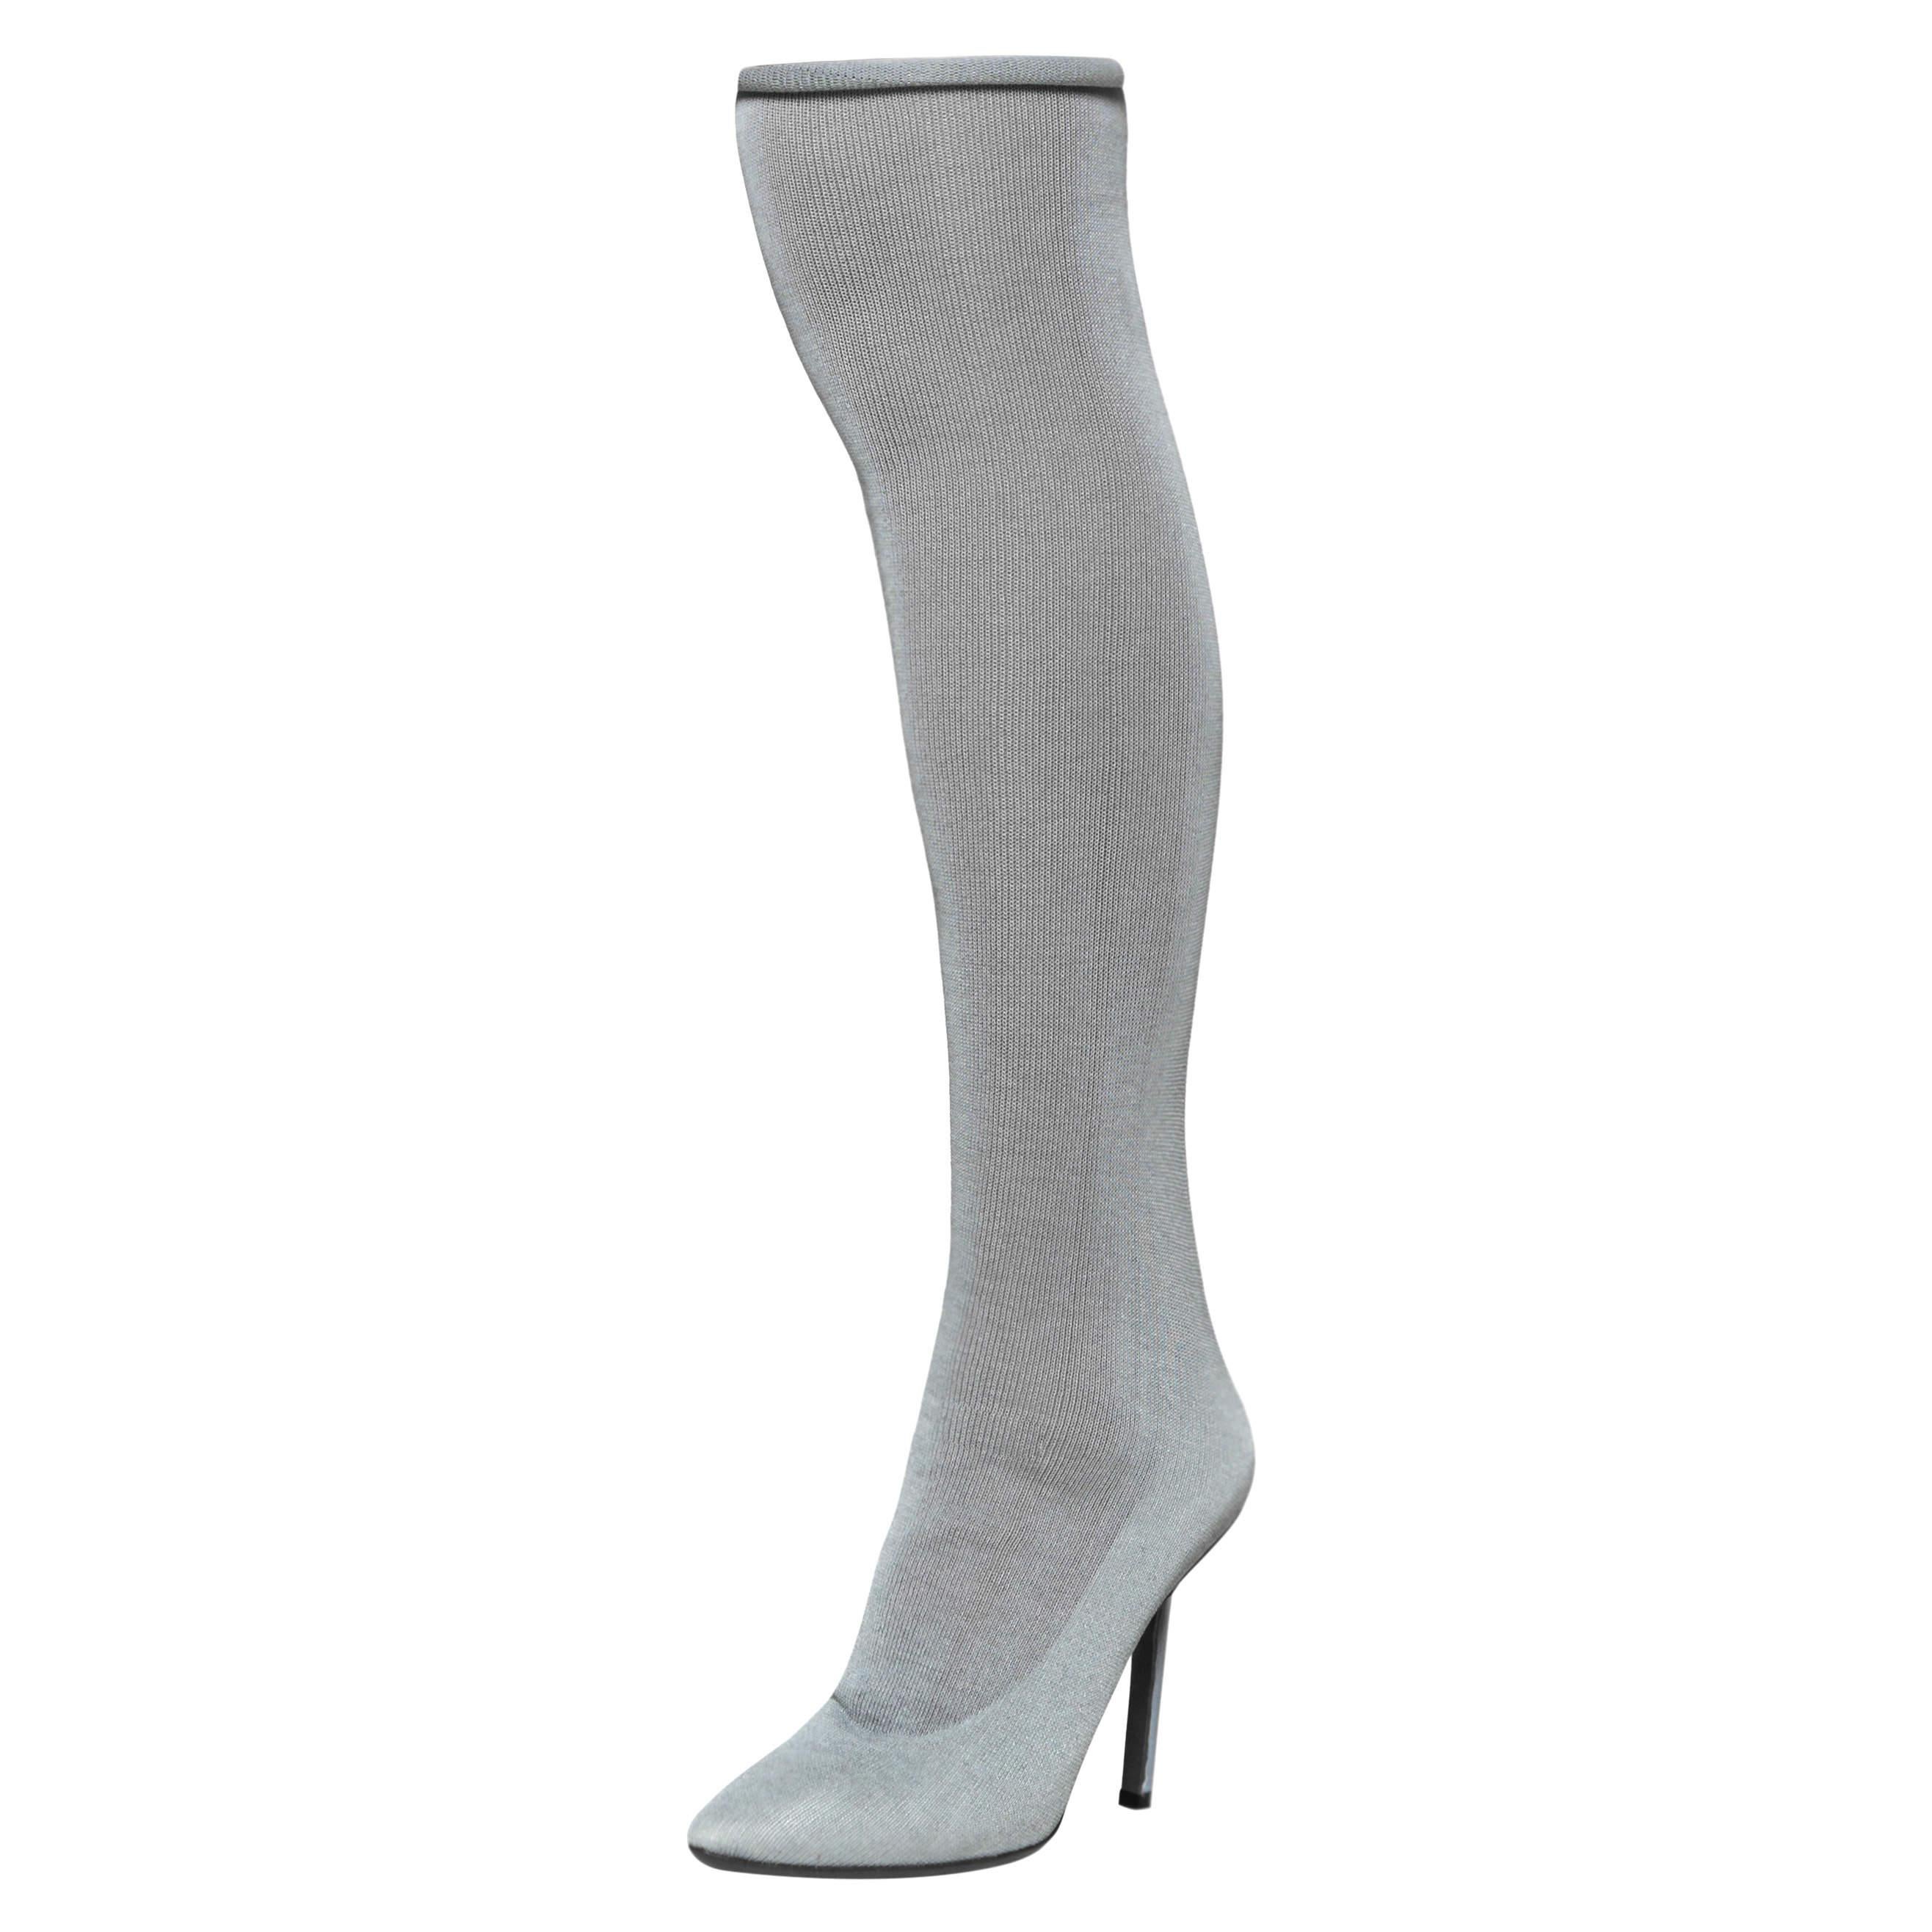 Vetements promises to elevate your style with this fabulous pair of boots. Let this stretch fabric pair of boots accentuate your style this season. They come in a thigh-high silhouette with pointed toes and a sock-like fit.

Includes: Original